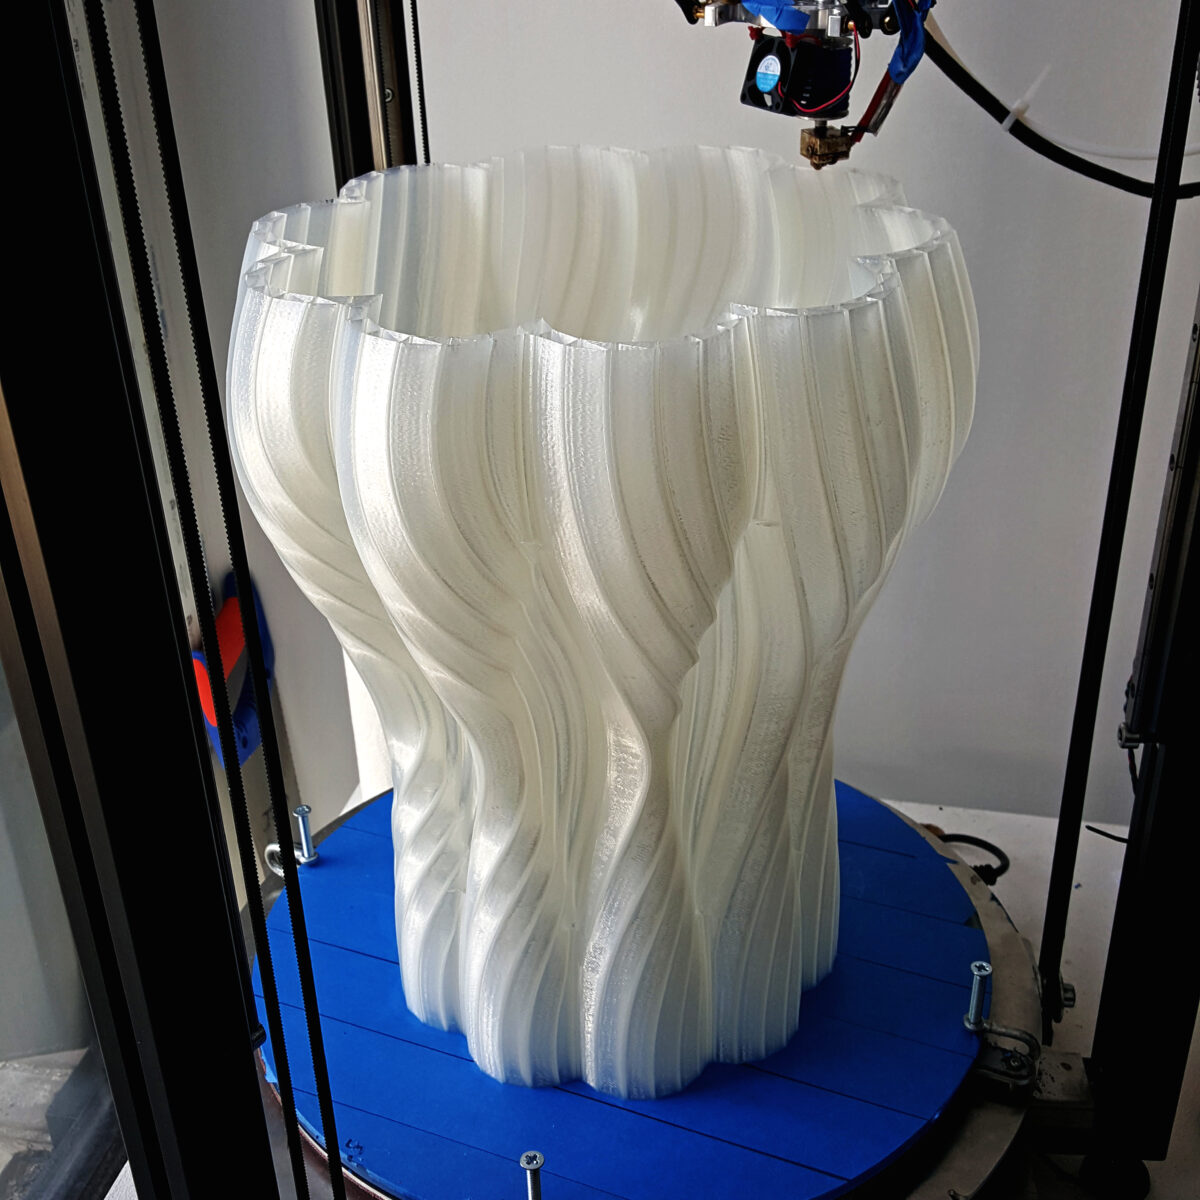 3D Printing process behind the The Smoke Stool – 1kg of PLA bioplastic printed at high speed and high temperature with custom infill ©Mamou-Mani